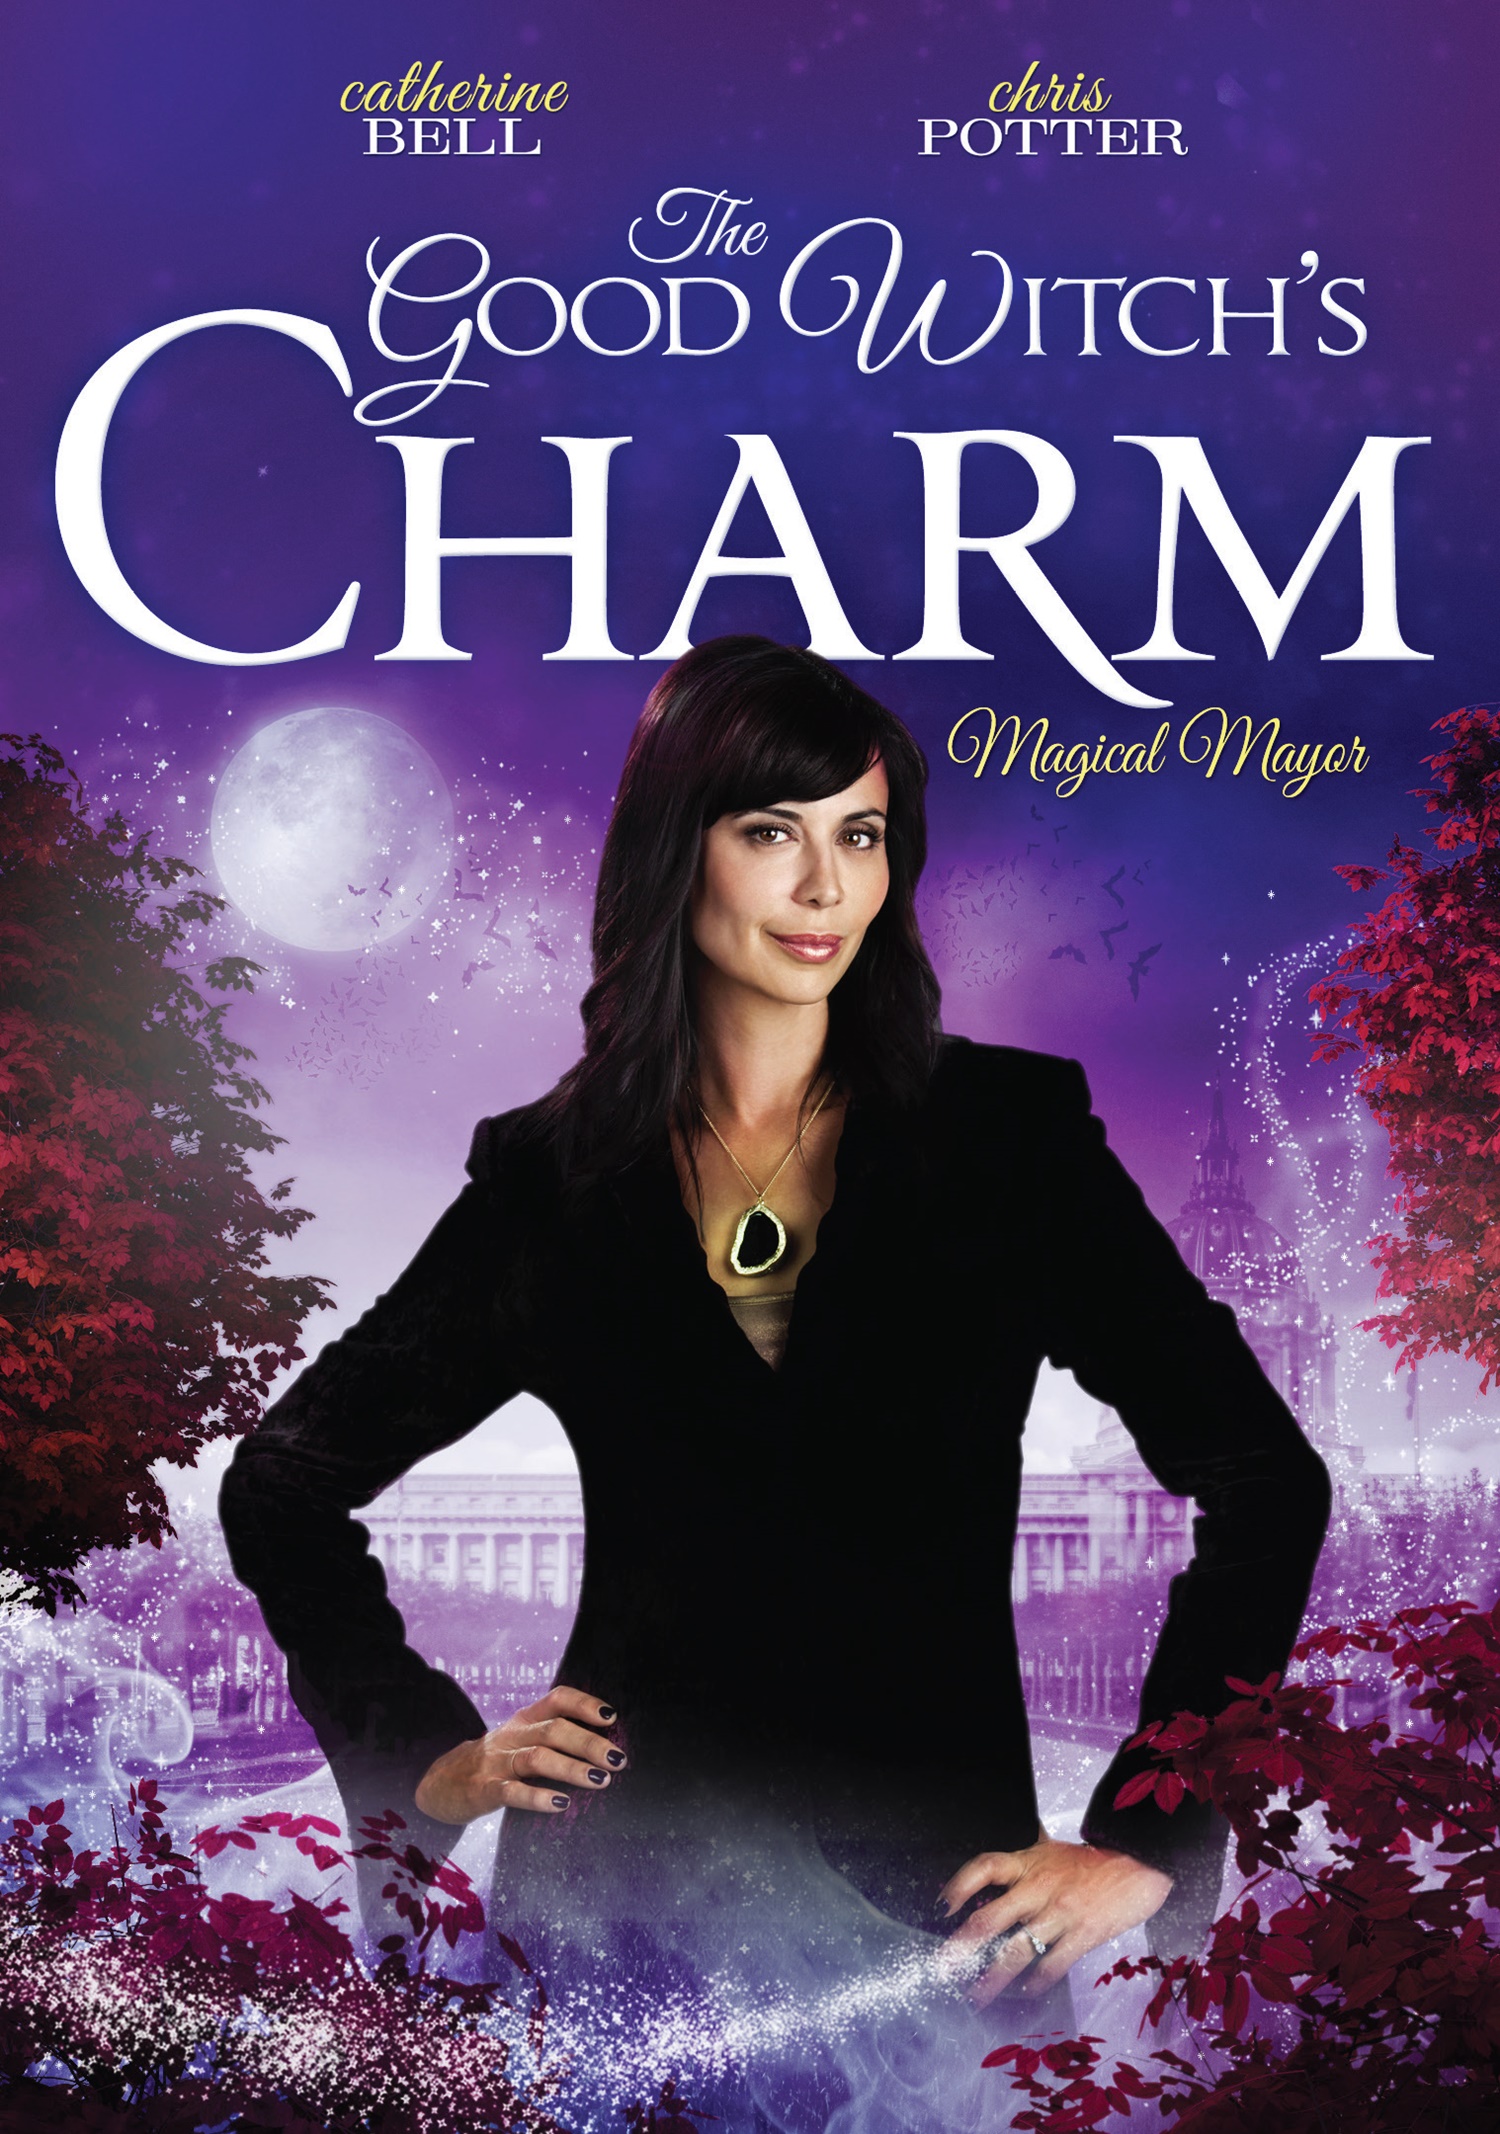 The Good Witch Charm (2012)